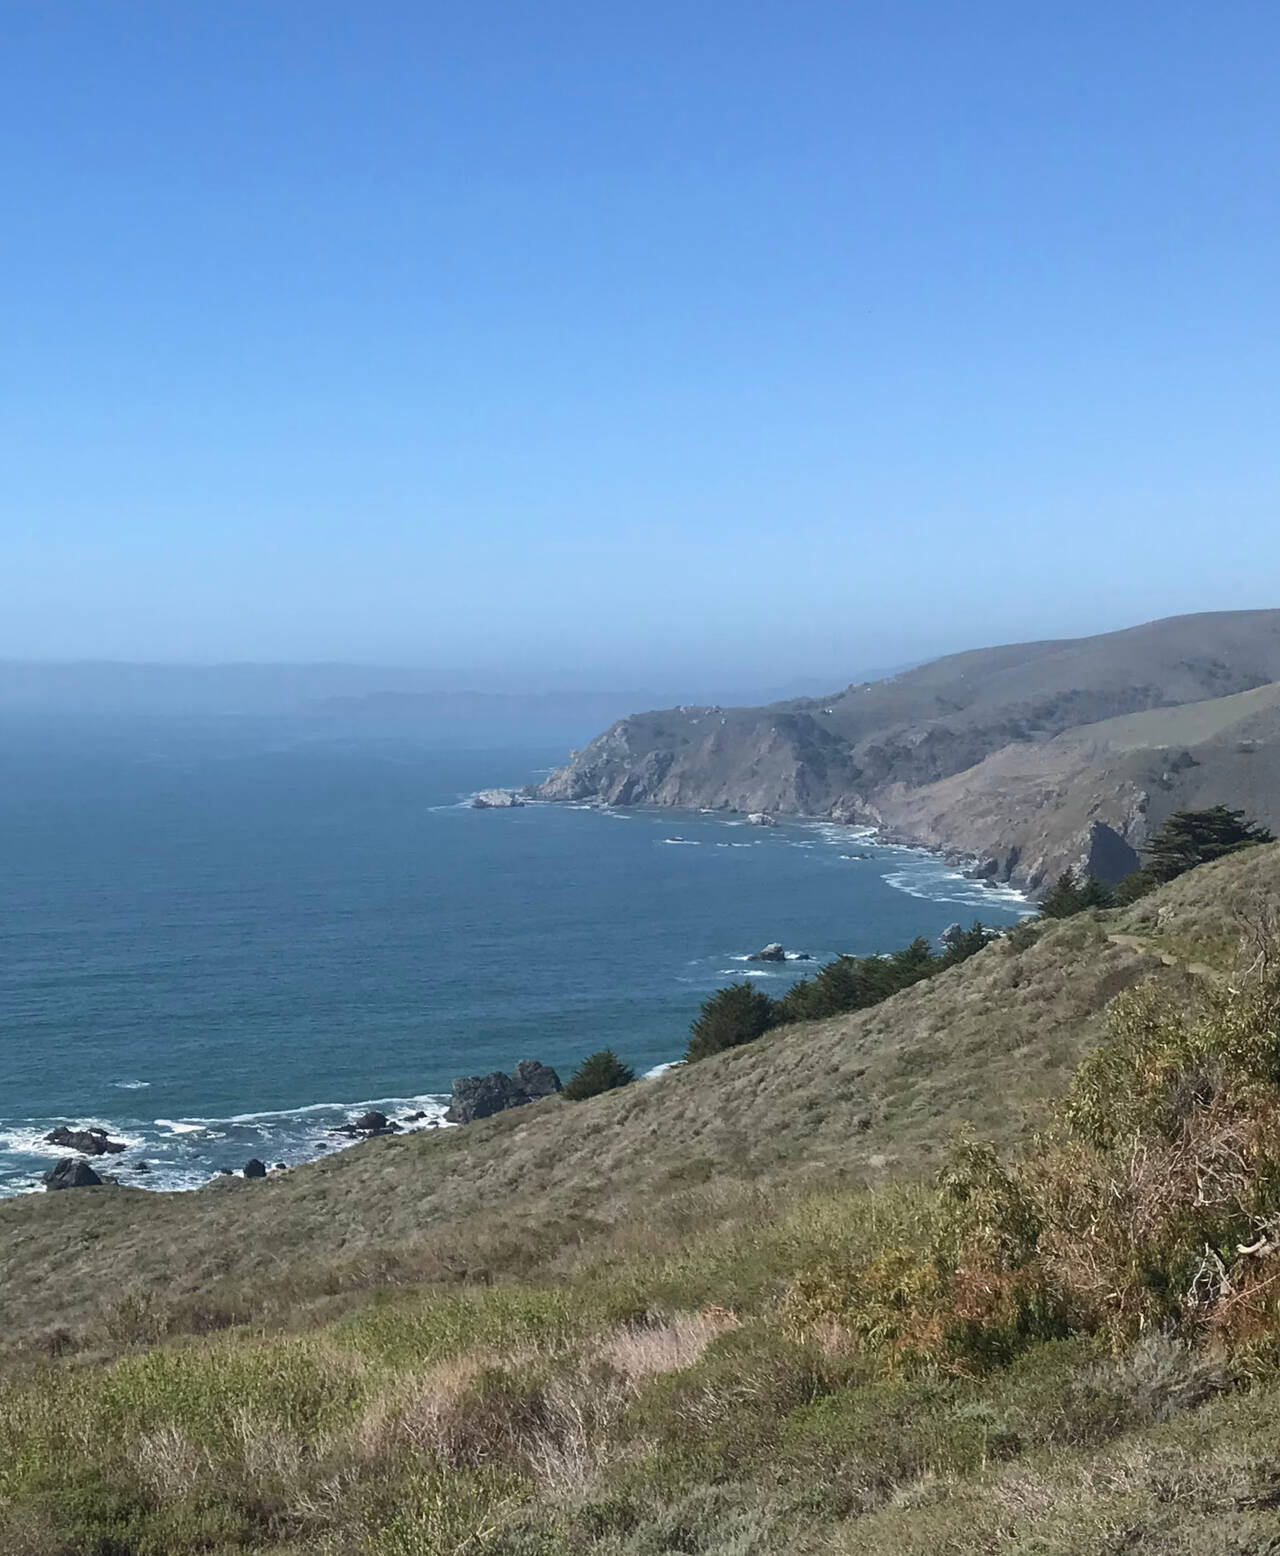 Looking north toward Point Reyes, rugged cliffs line the coast